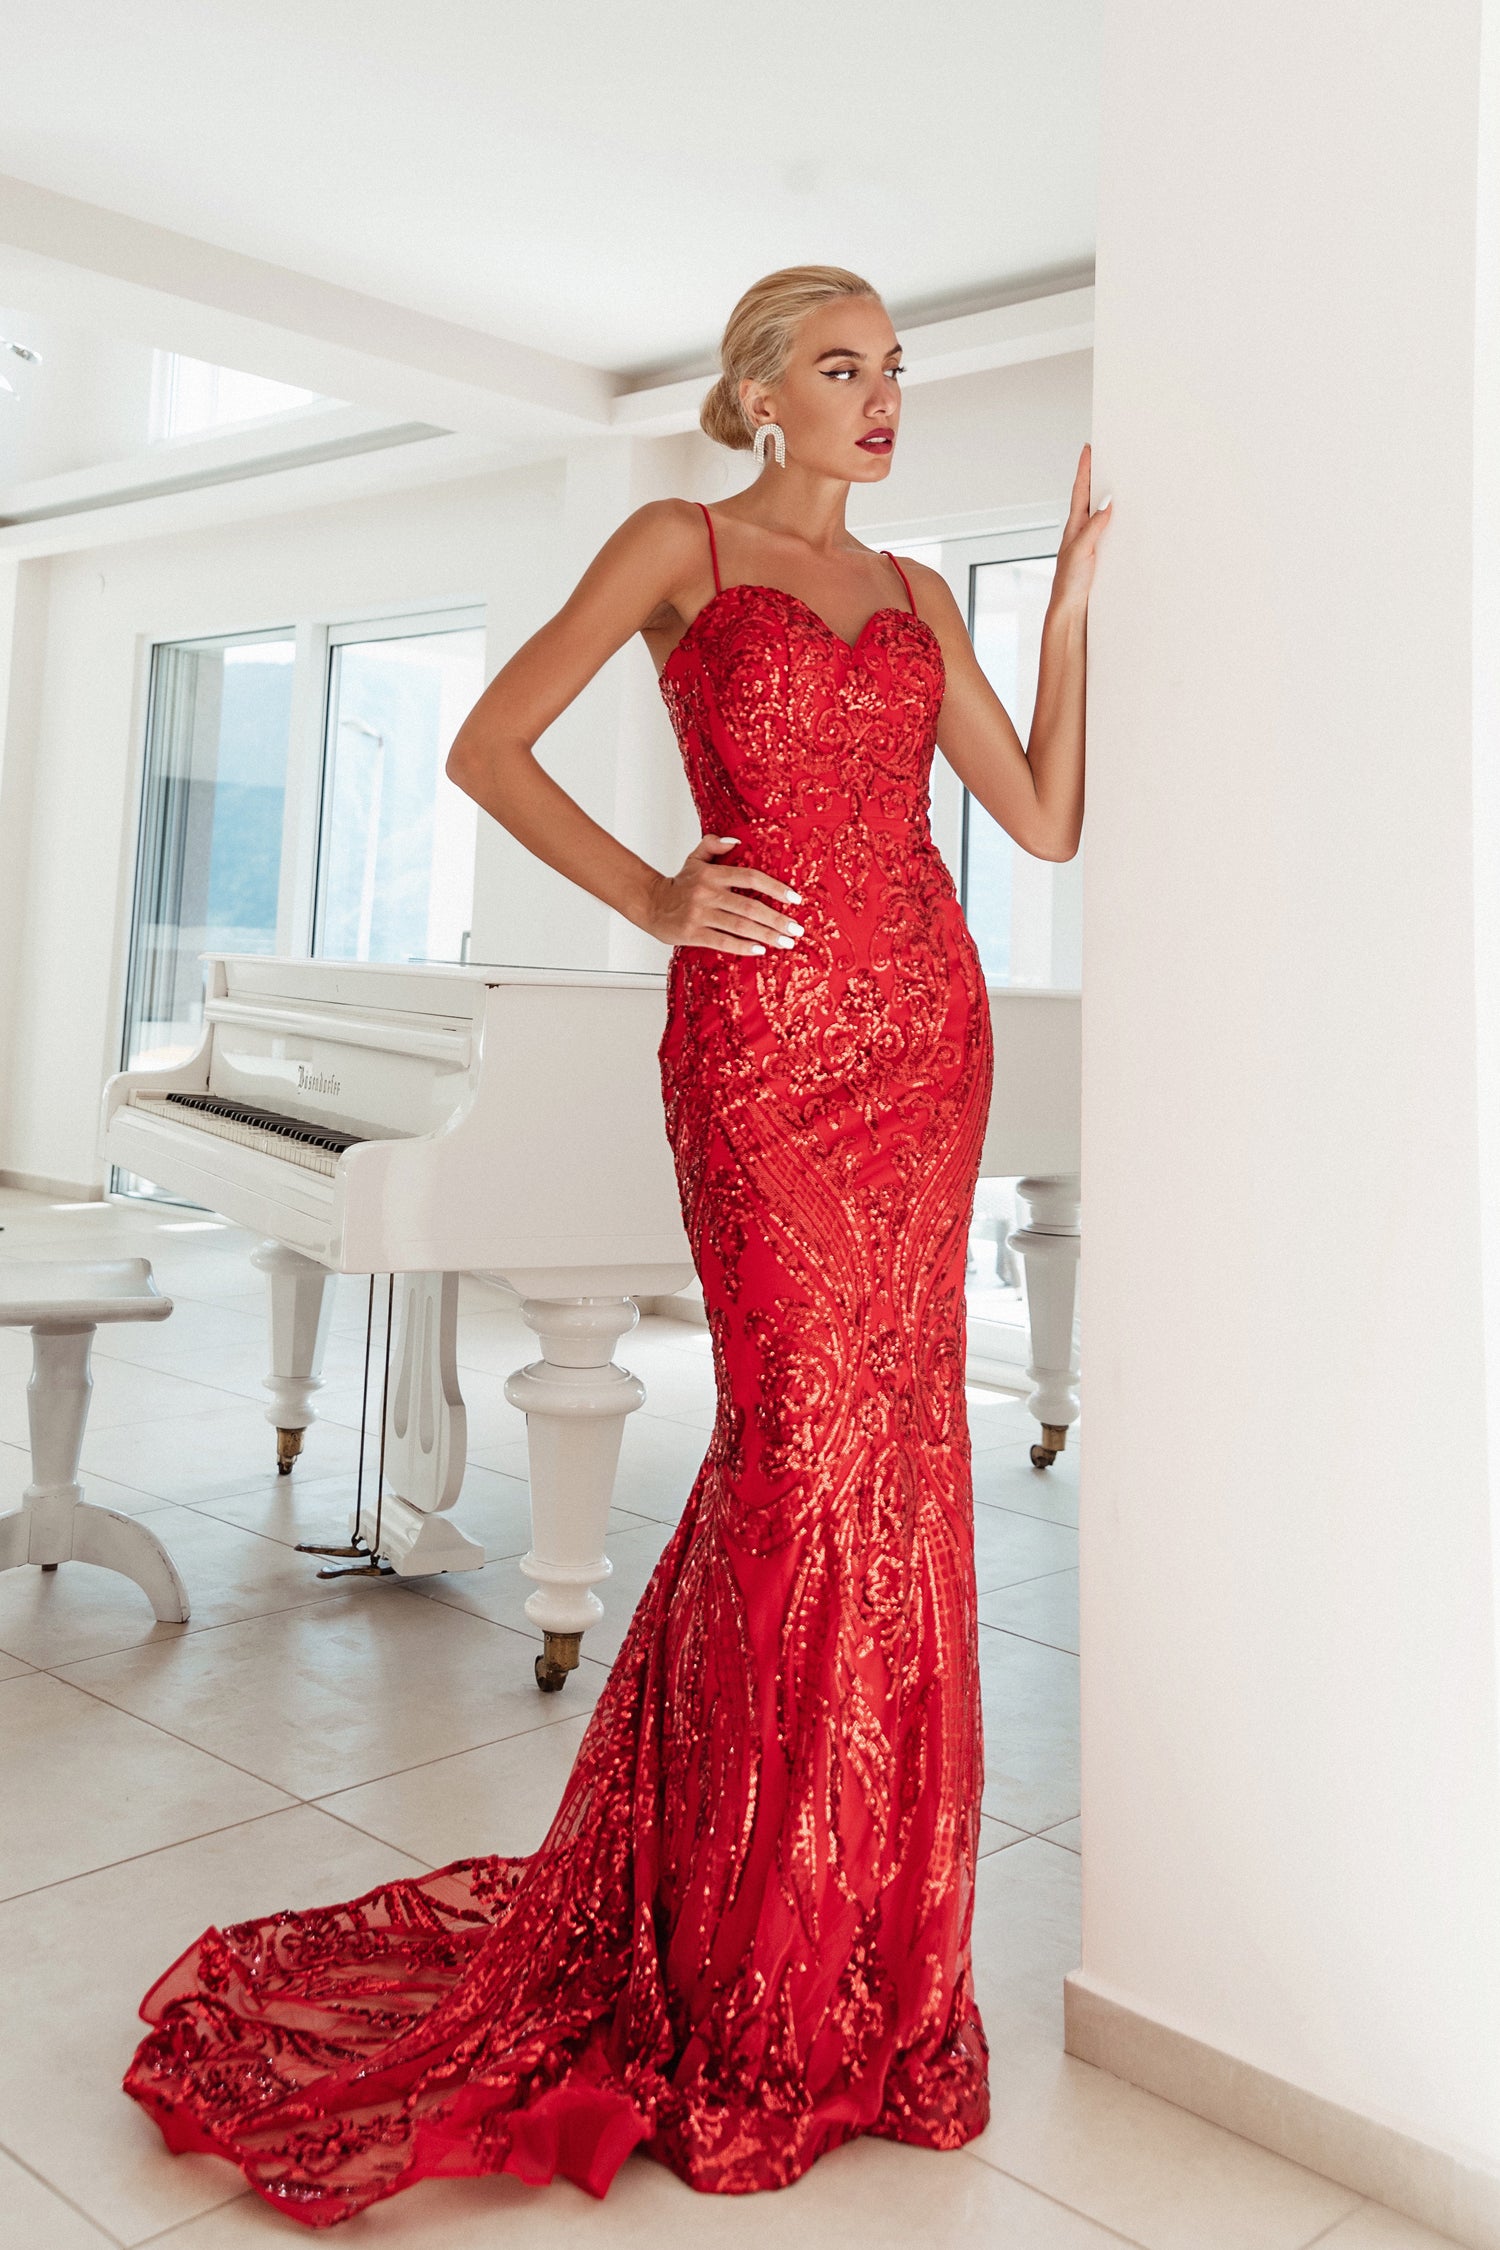 Tina Holly Couture BA999 Red Sequin & Lace Mermaid Formal Dress